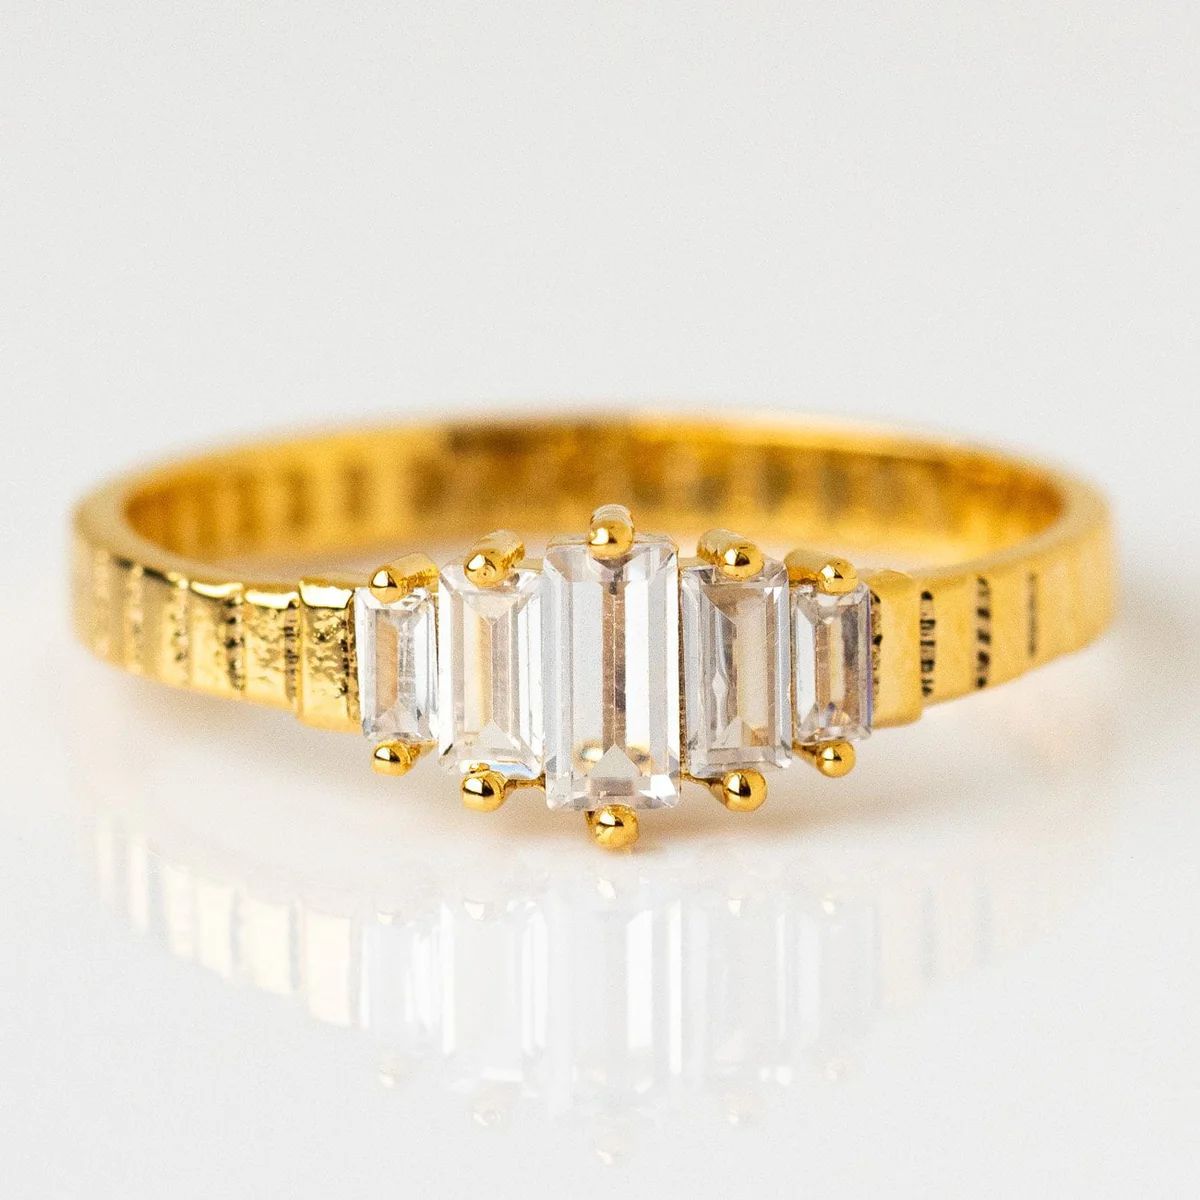 Supreme Baguette Ring | Local Eclectic